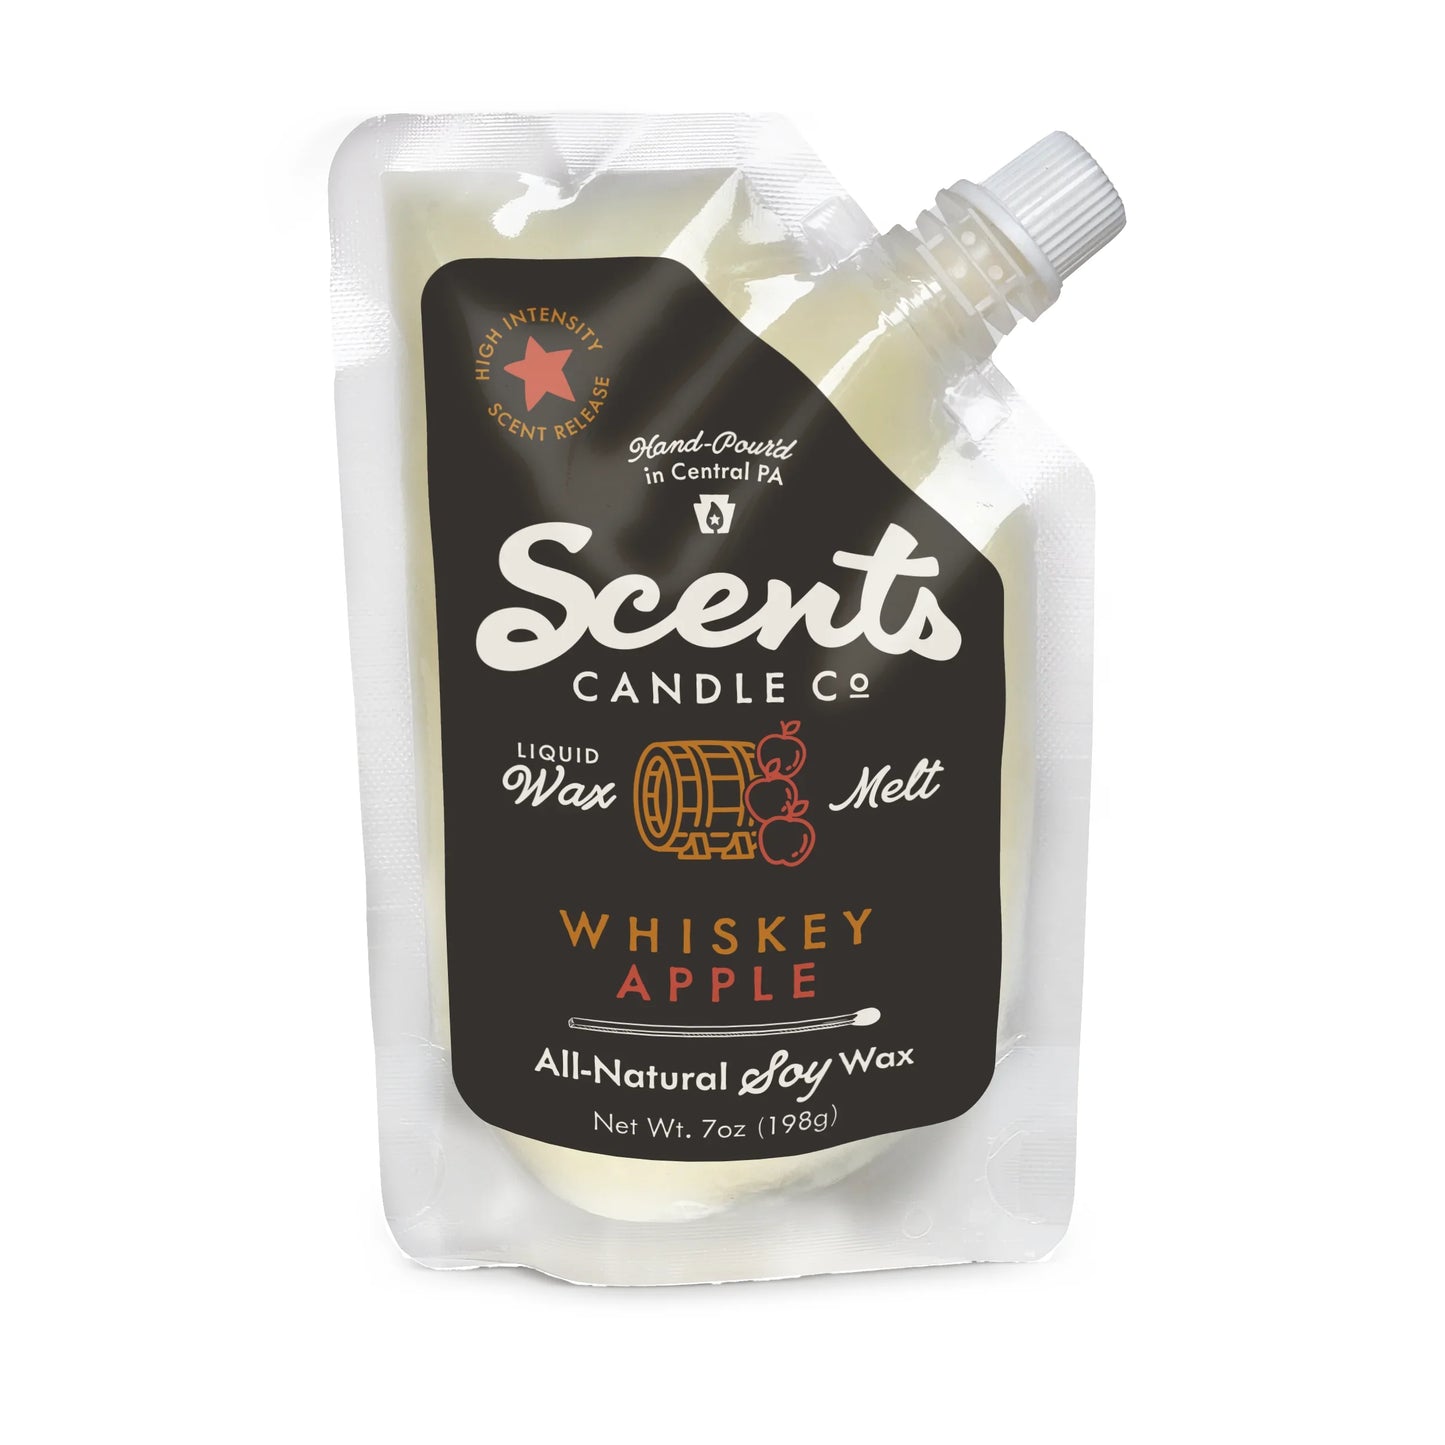 Scents Candle Co. Whiskey Apple Liquid Wax Melt